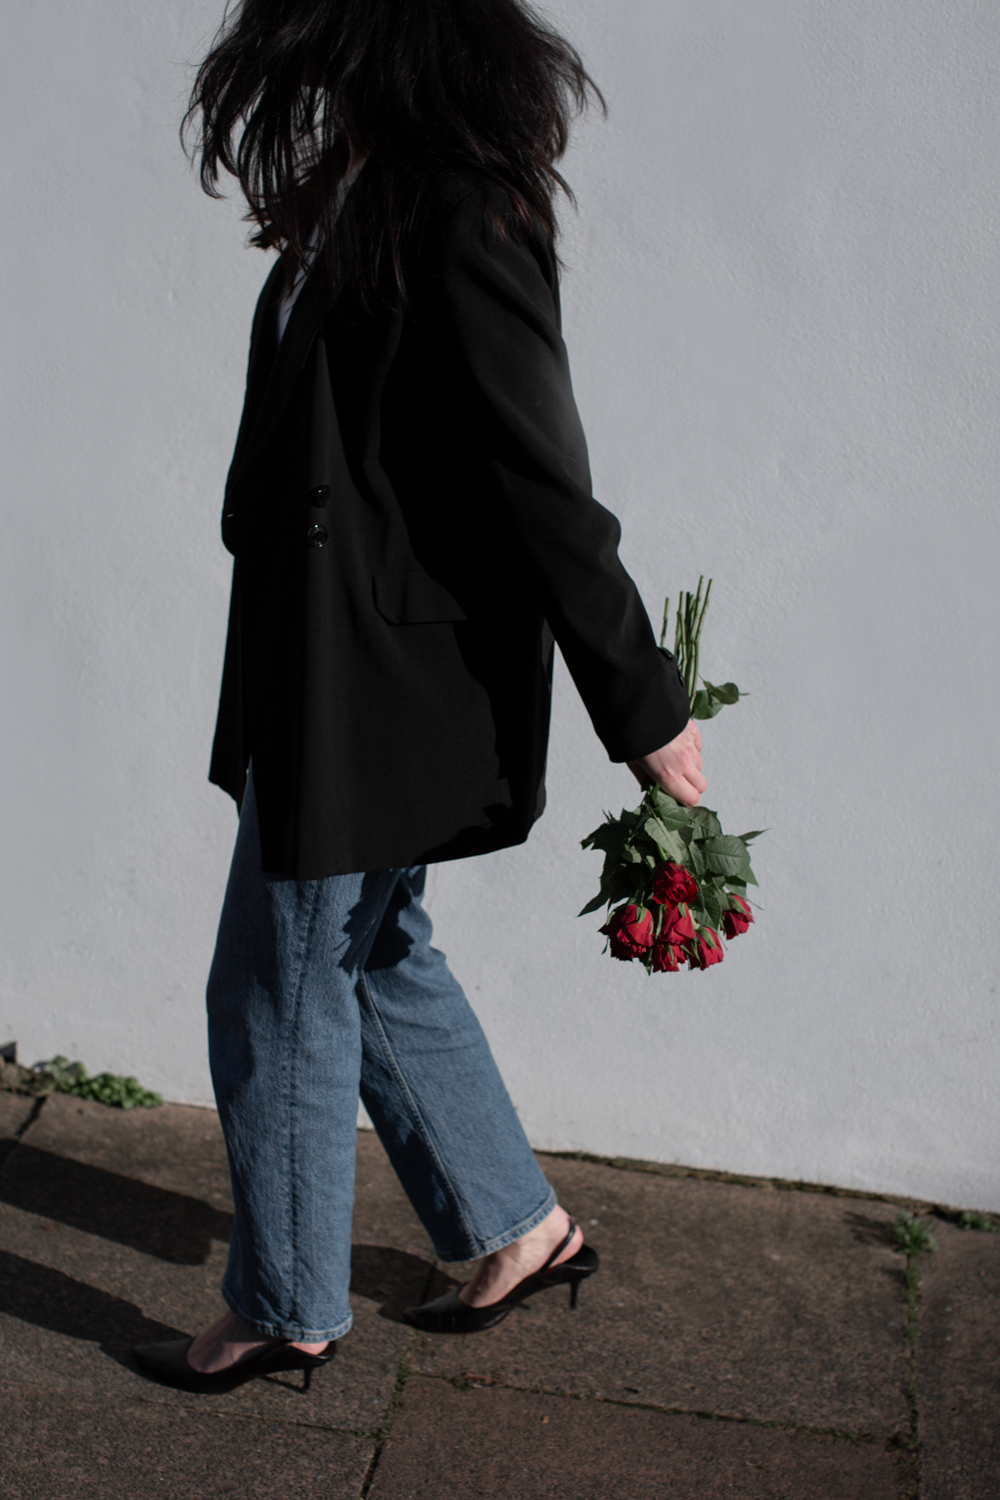 Back of woman wearing blazer and jeans holding roses